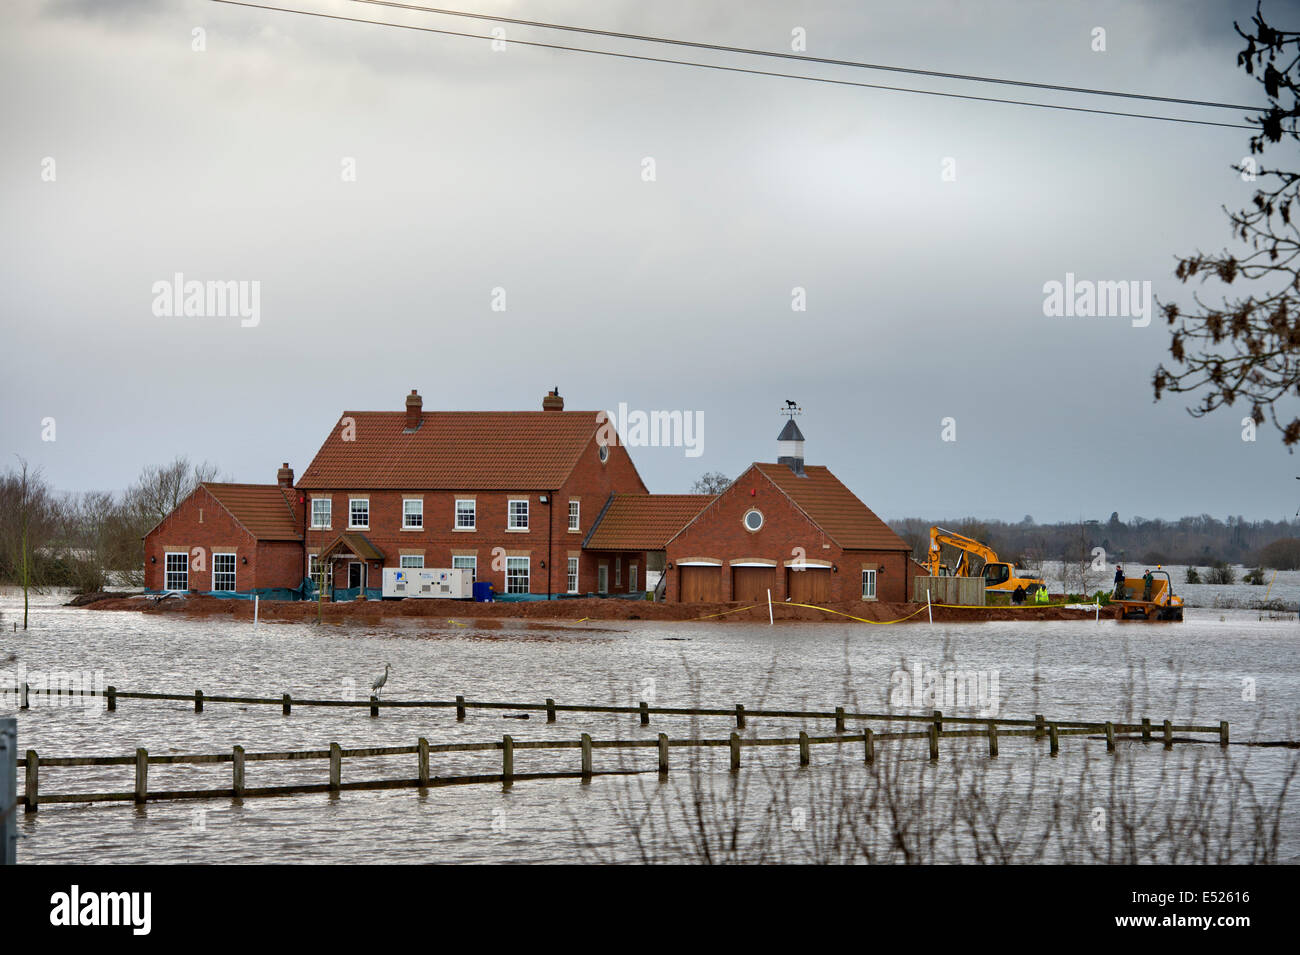 Dyers Farm - the home home of Sam Notaro which he sucessfully defended from floodwater in the village of Moorlands on the Somers Stock Photo